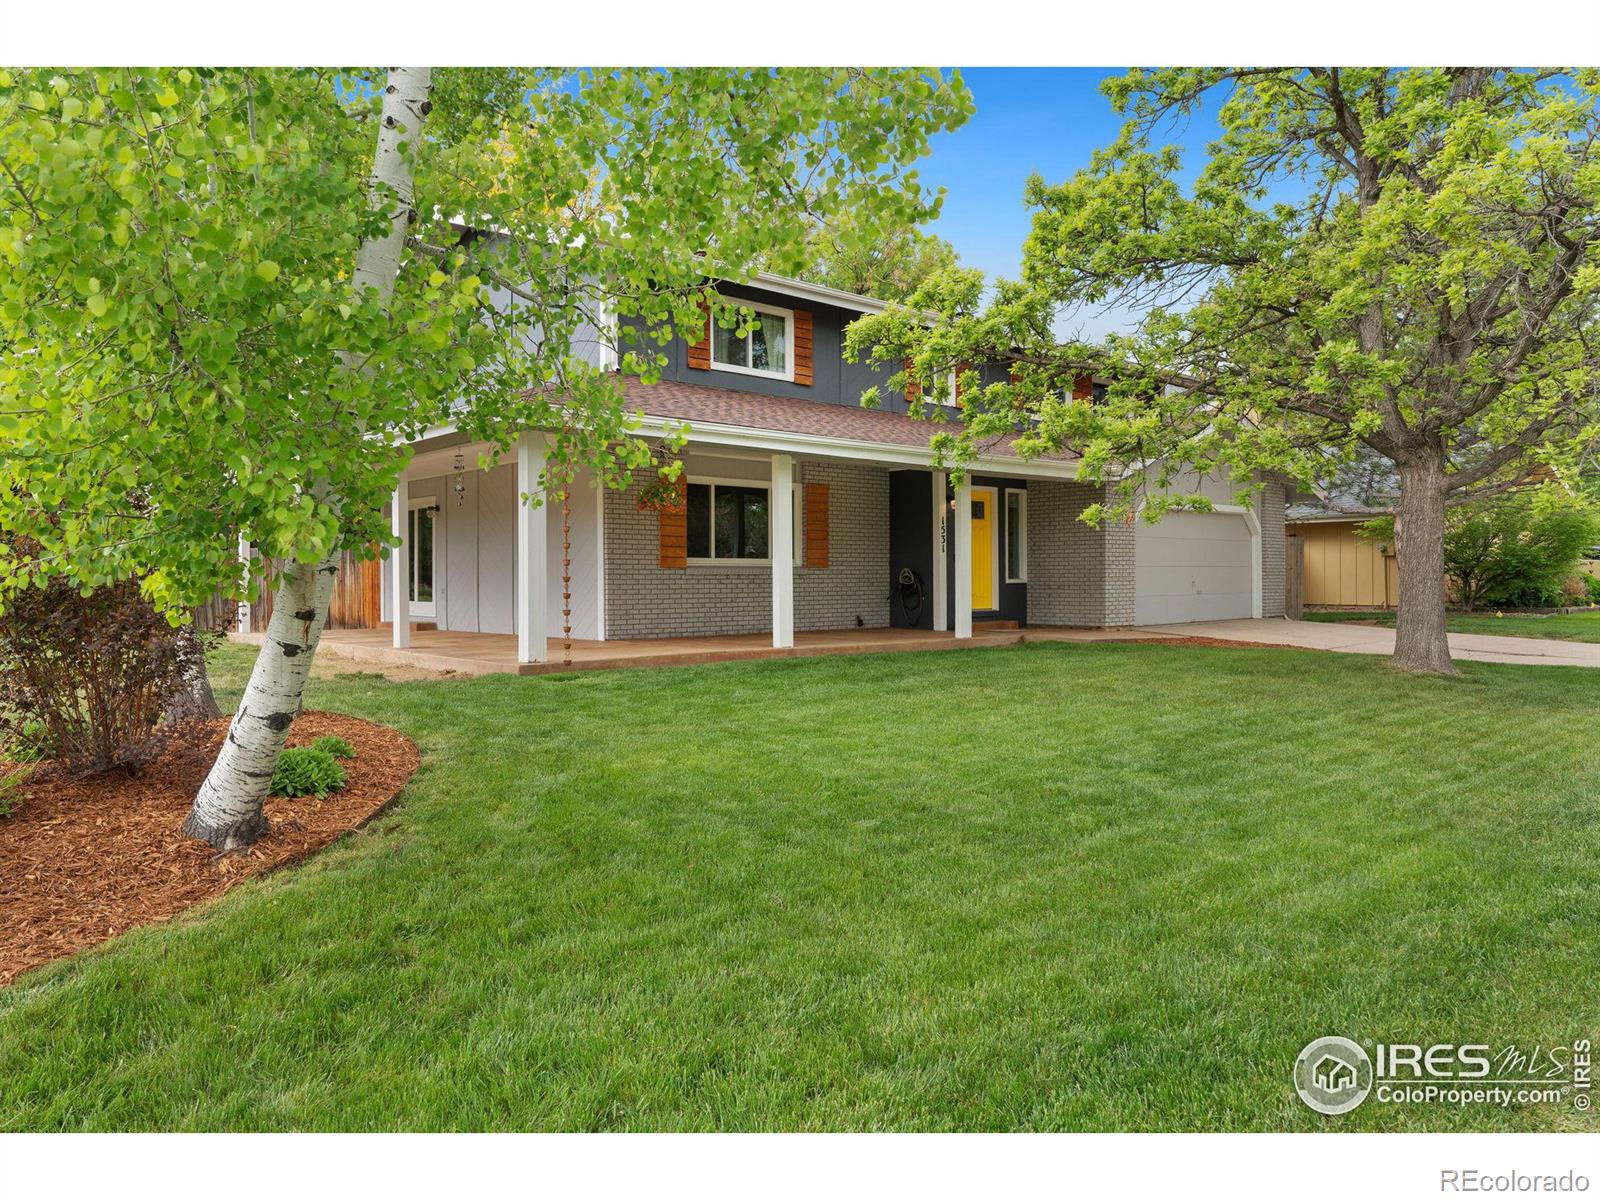 Report Image for 1531  Centennial Road,Fort Collins, Colorado